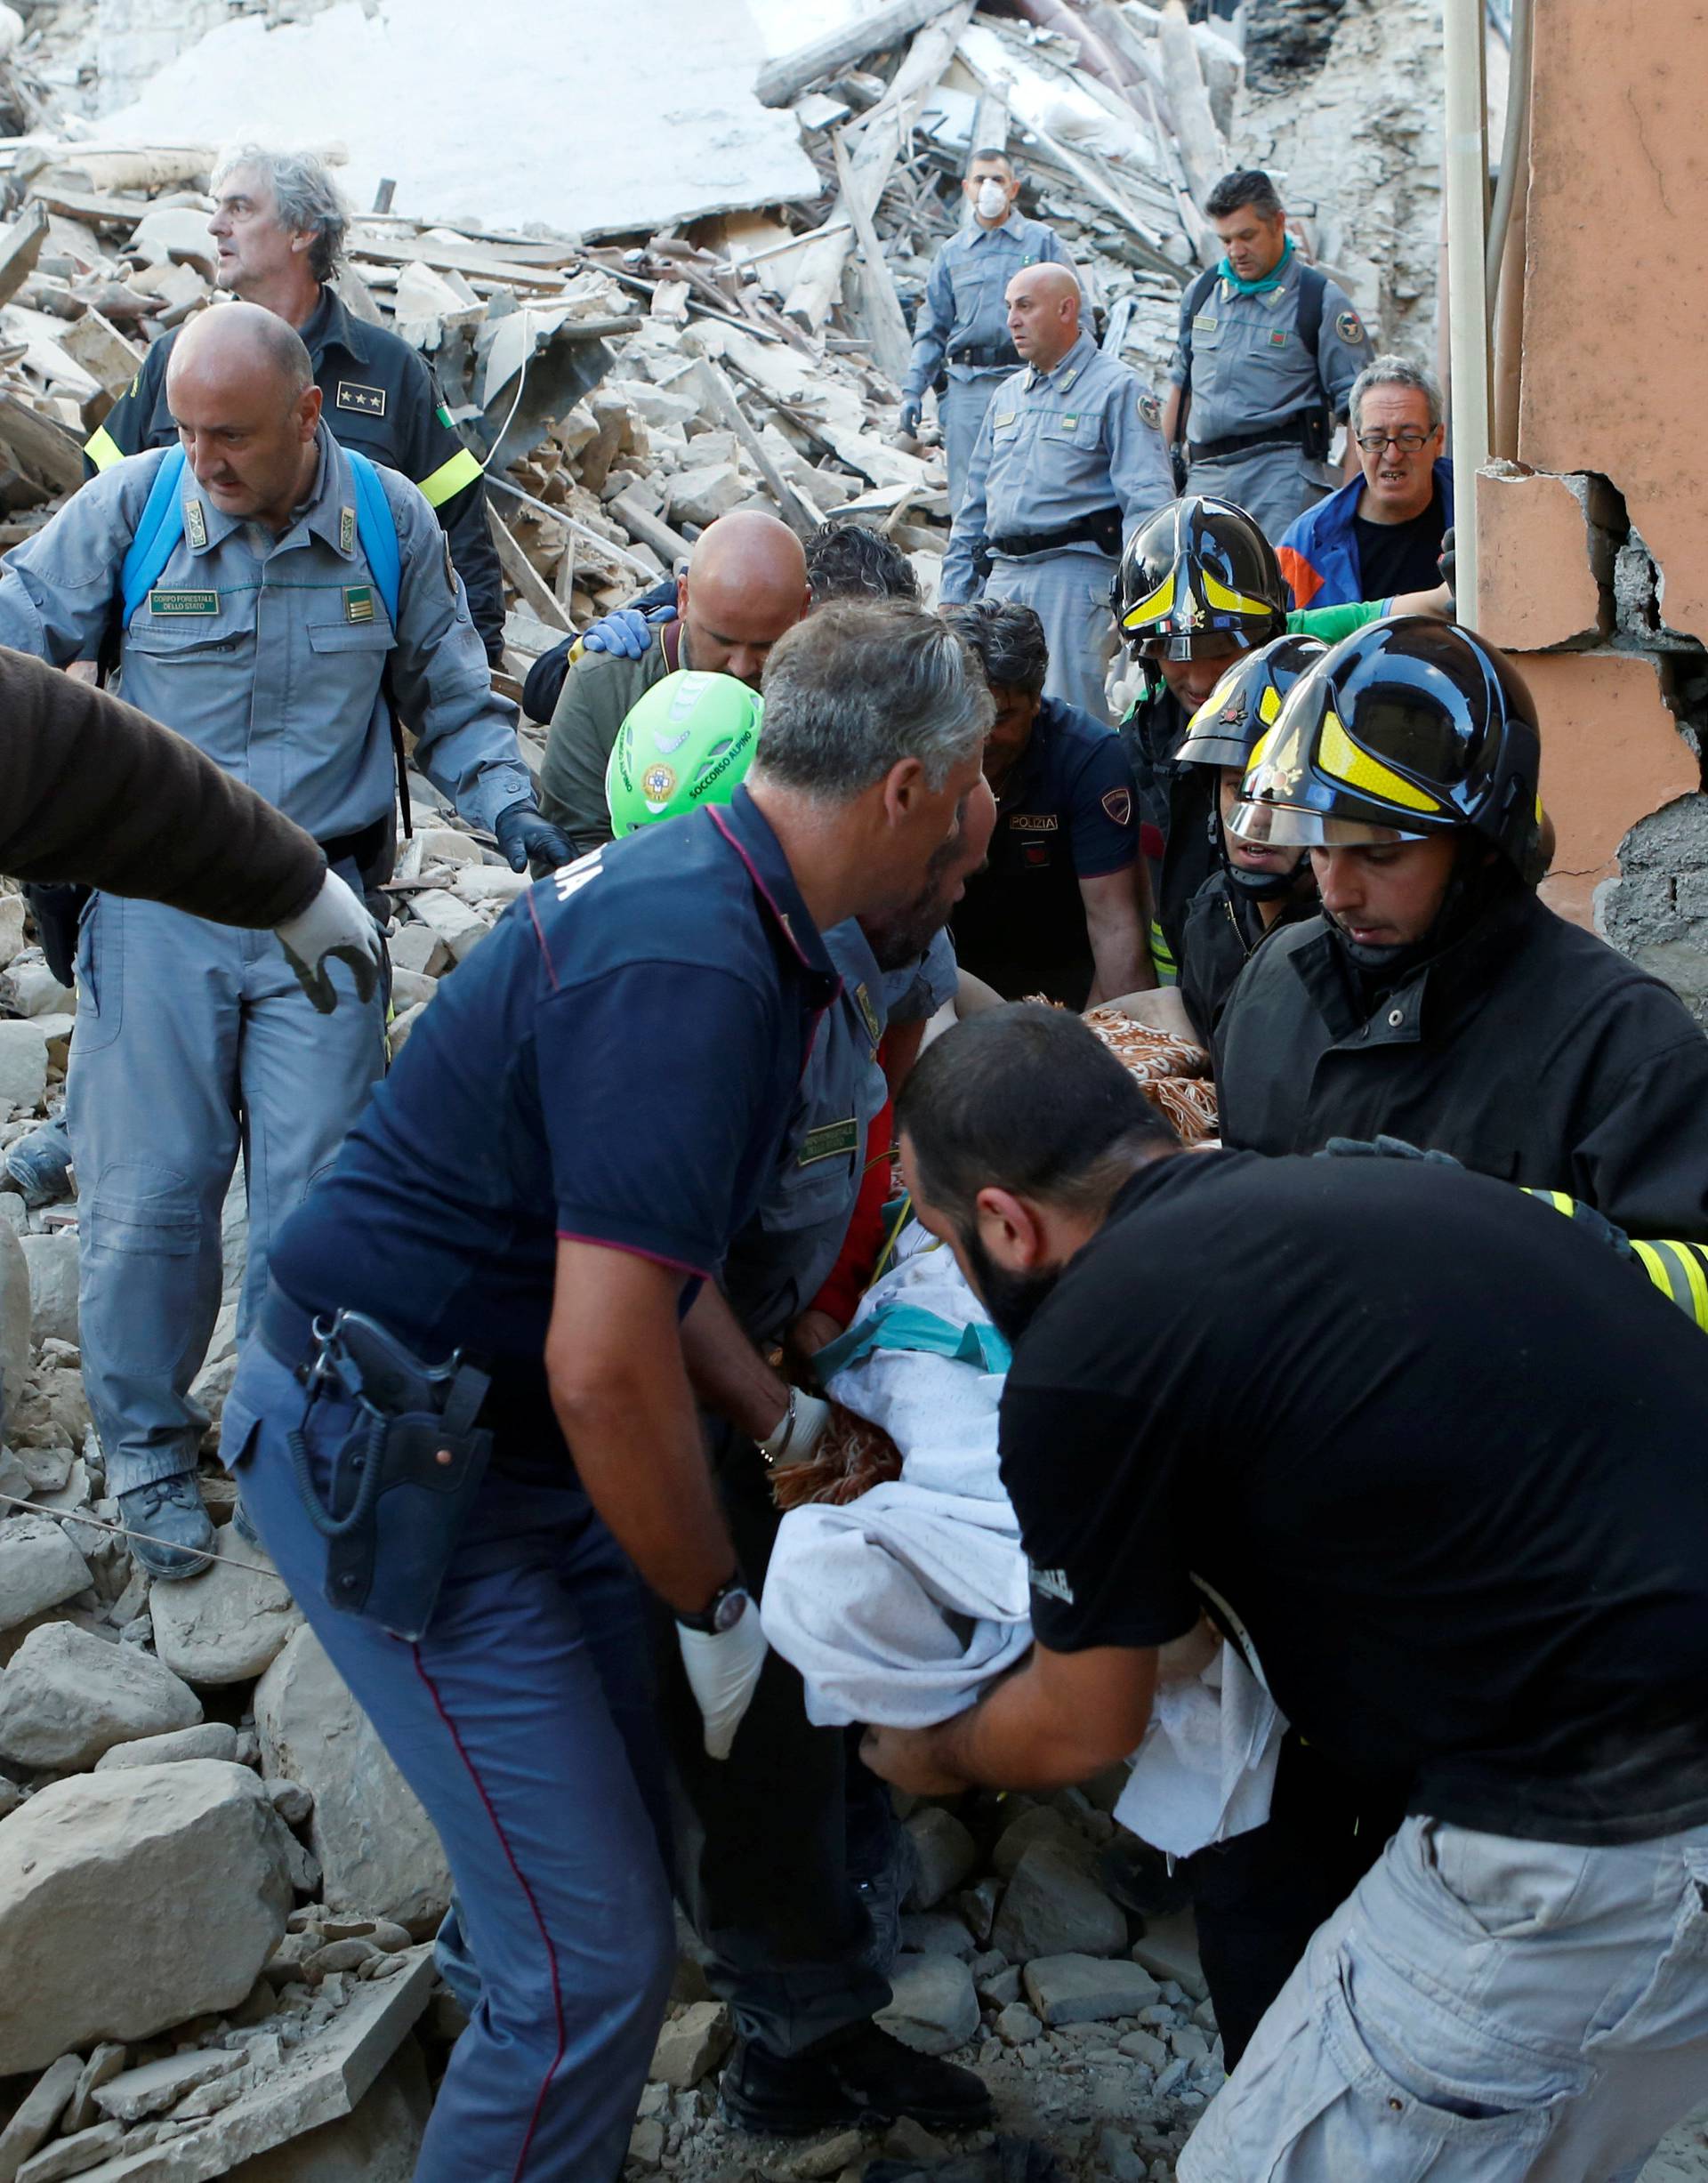 Rescuers carry a person on a stretcher following a quake in Amatrice 